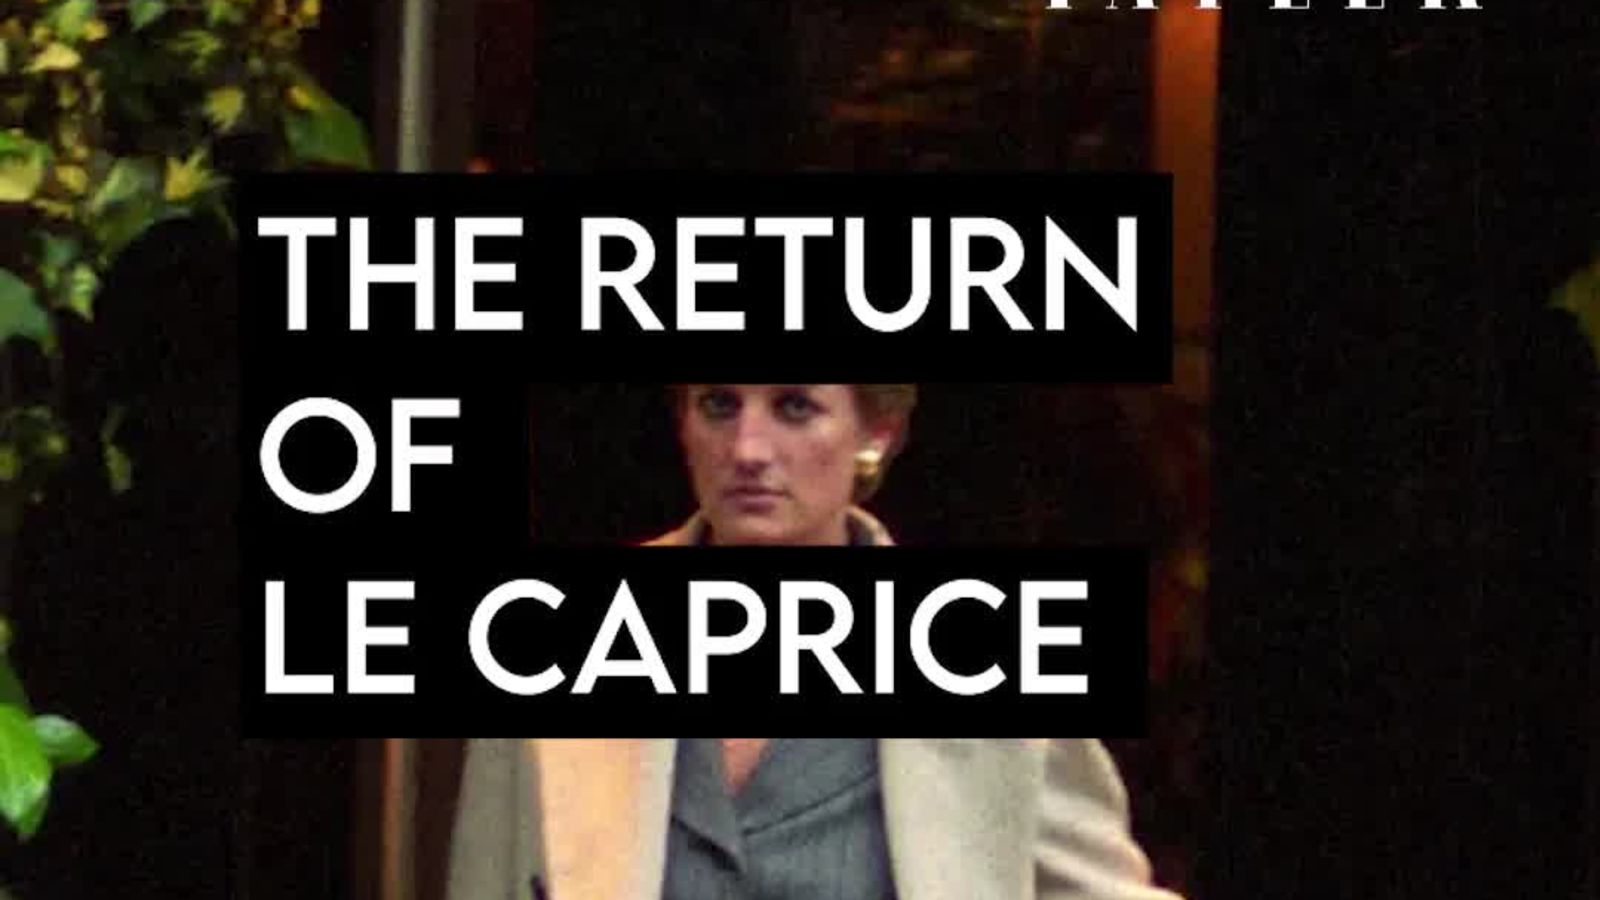 The Return of Le Caprice